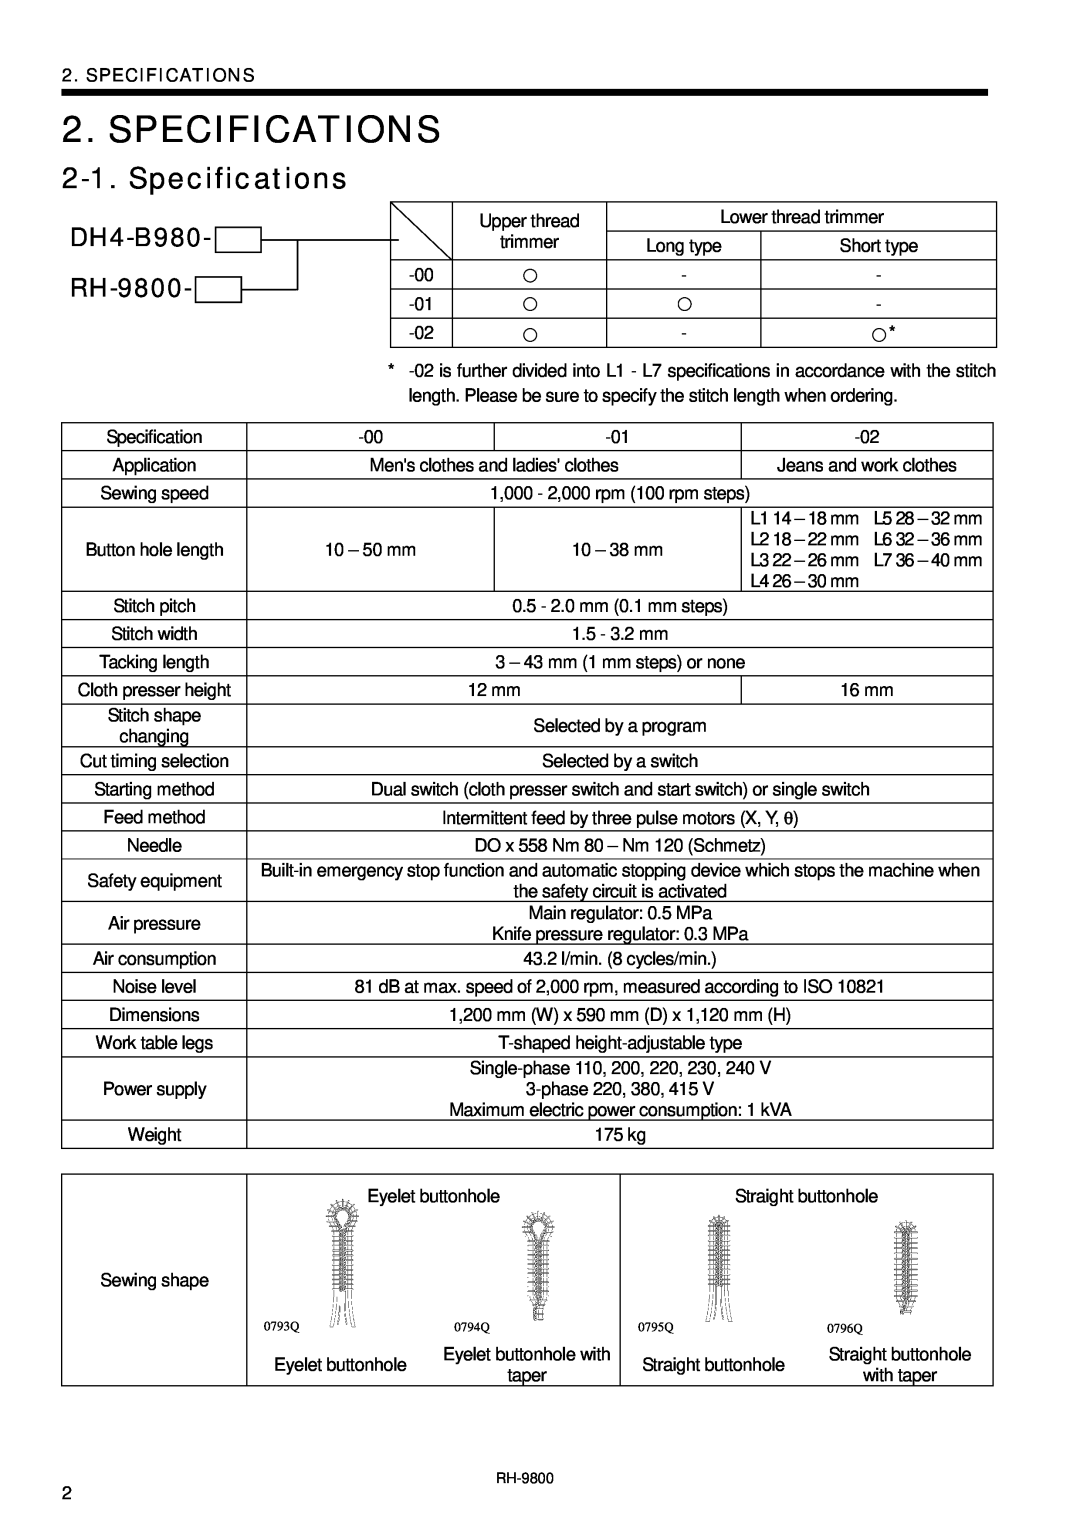 Brother instruction manual Specifications, DH4-B980- RH-9800 